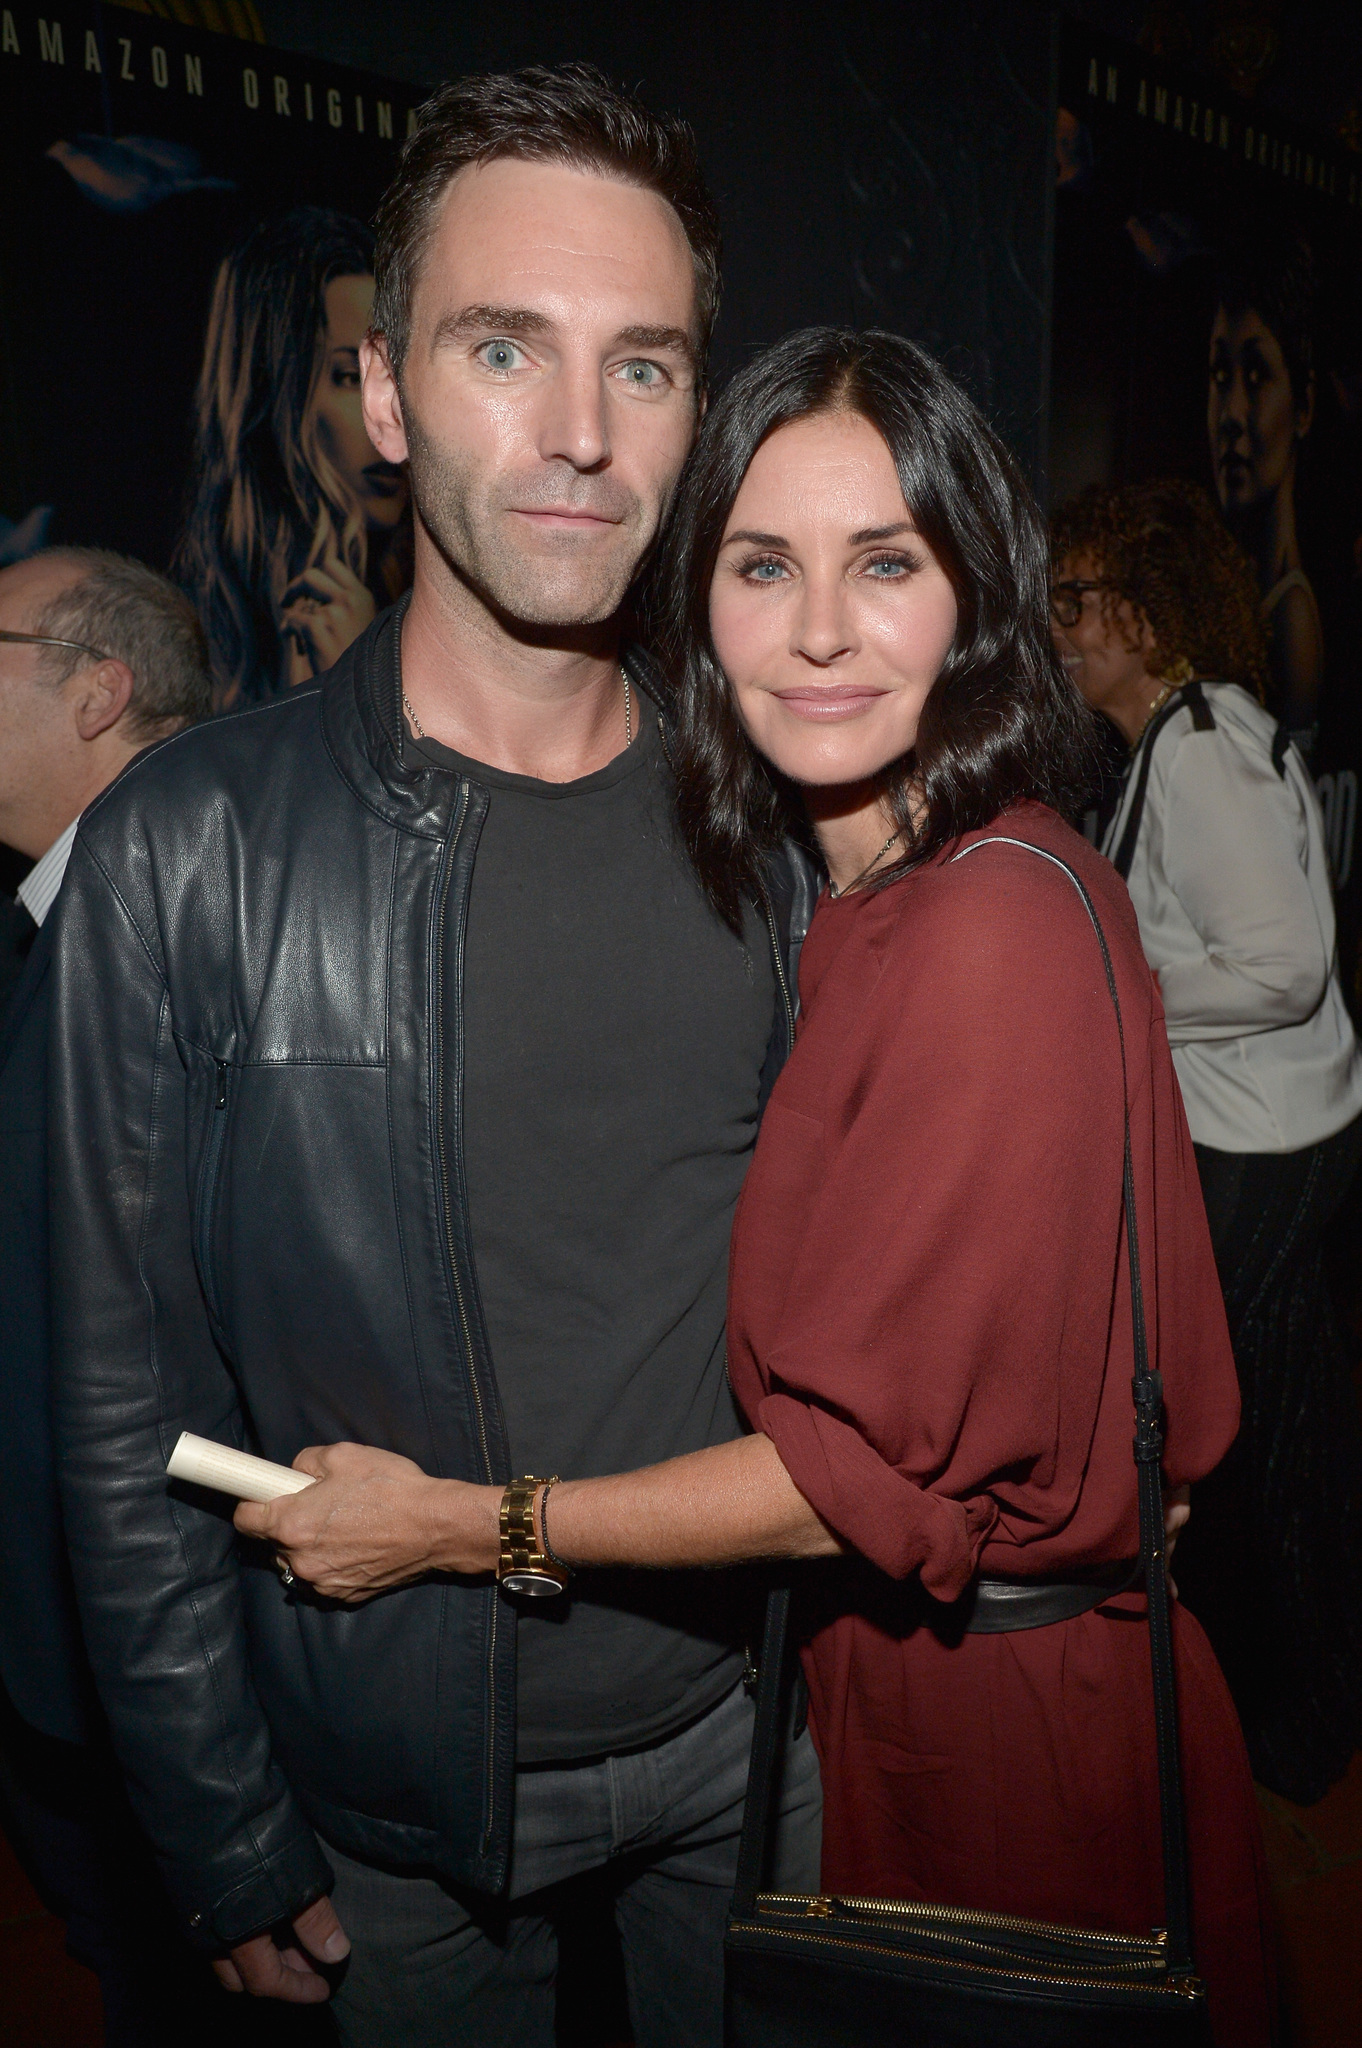 Courteney Cox and John McDaid at event of Hand of God (2014)